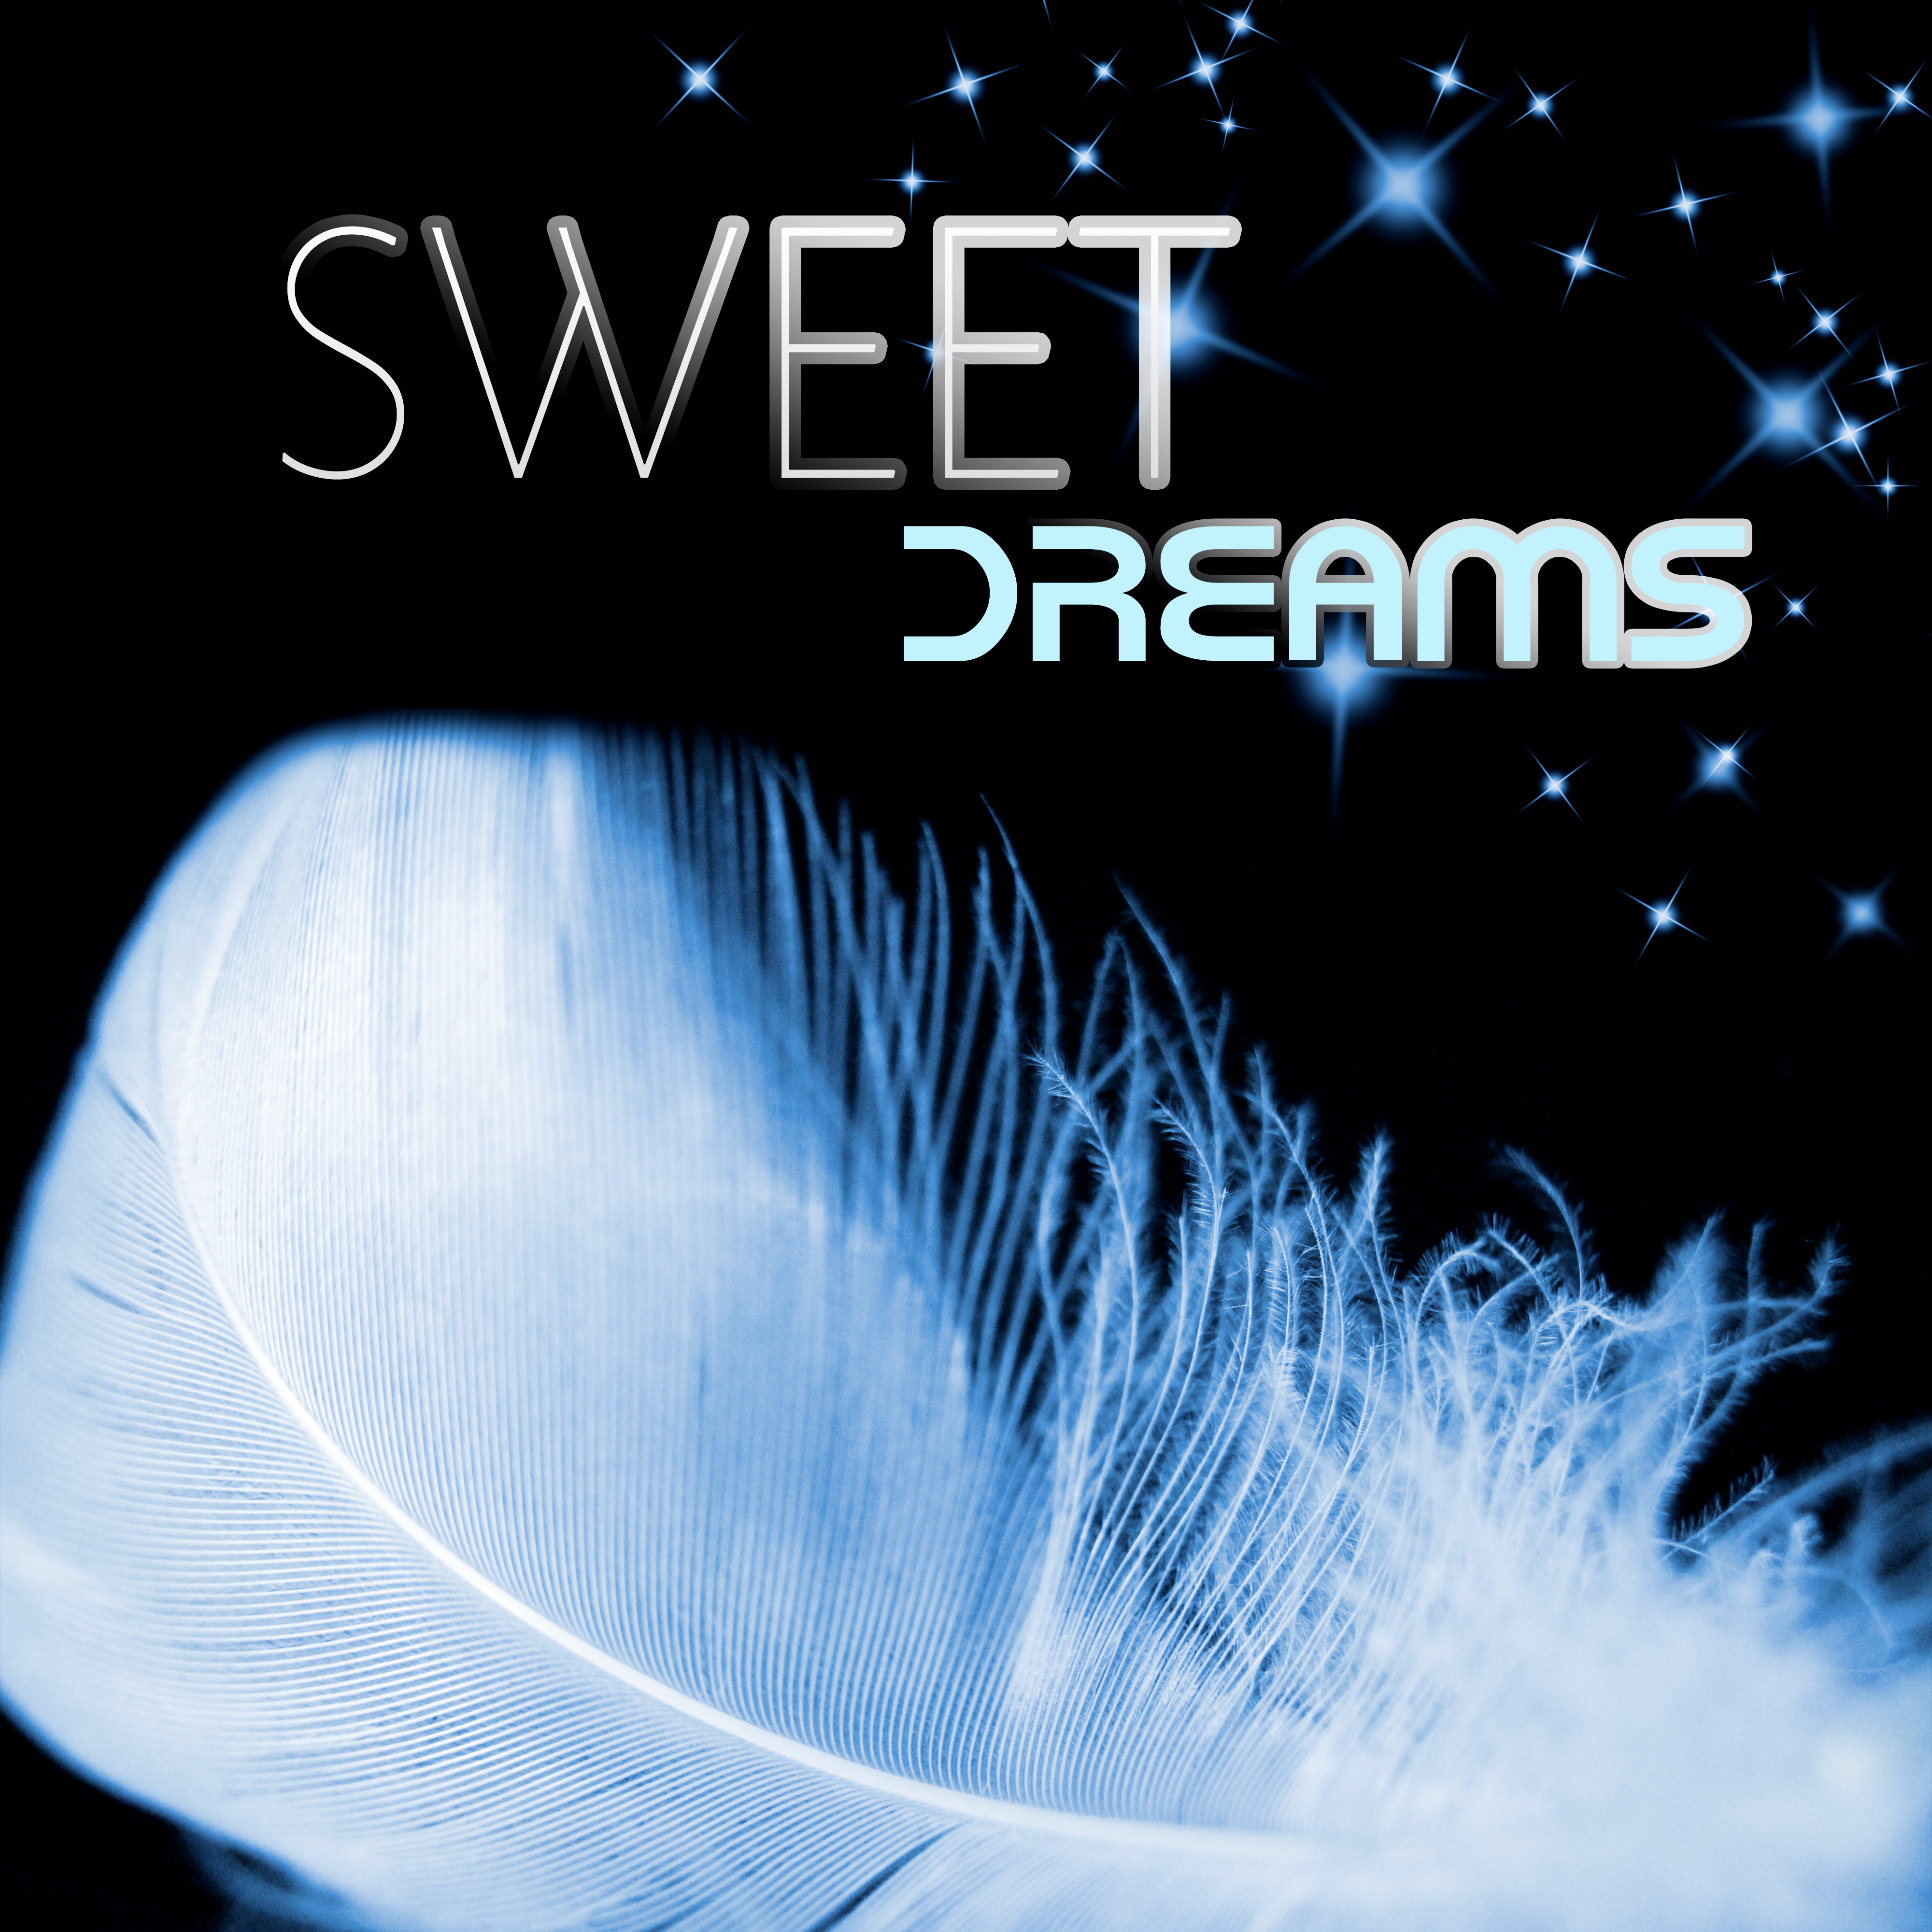 Sweet Dreams  Sleep Music to Help You Relax, Natural White Noise, Soothing Songs, Insomnia Cure, Dreaming